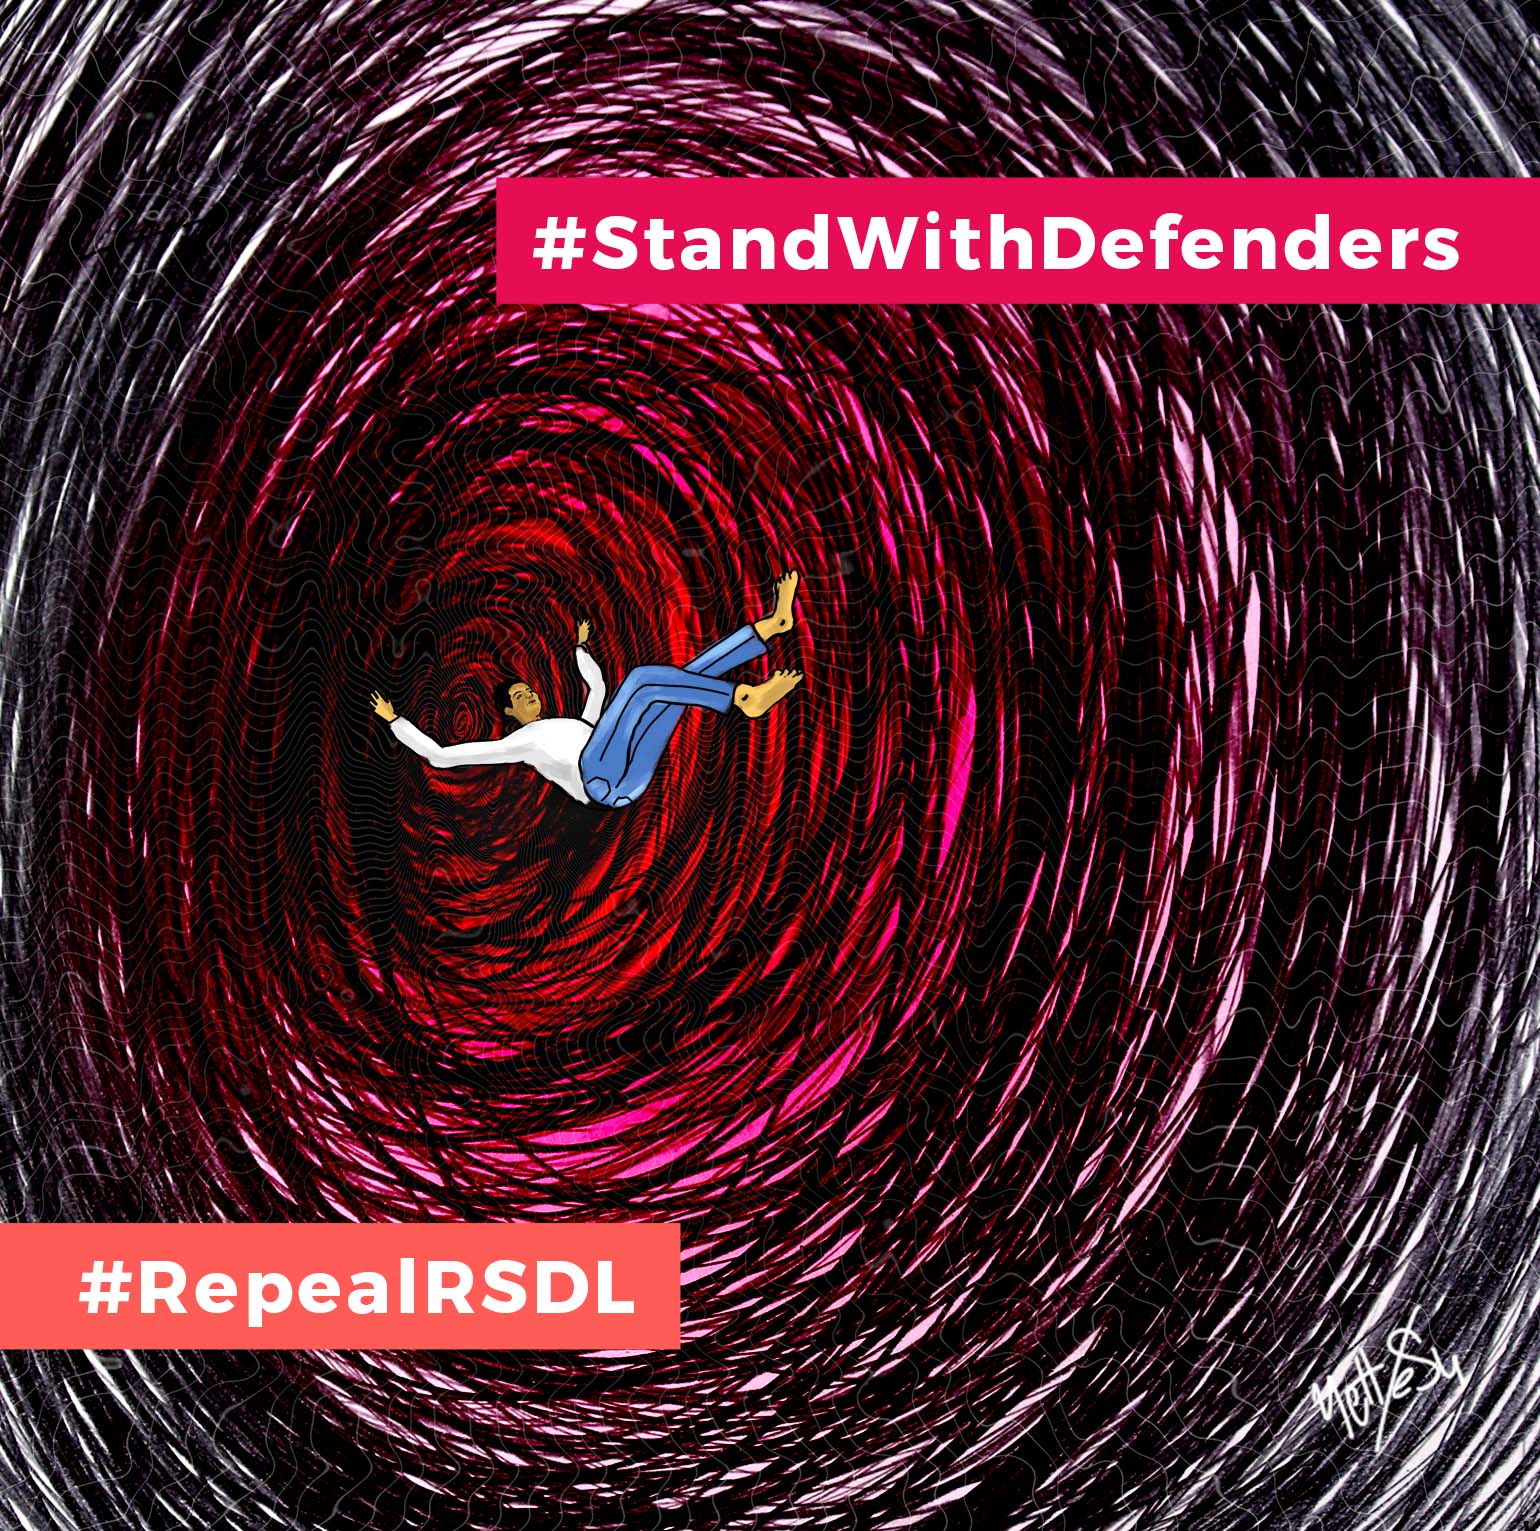 Join our campaign to #RepealRSDL